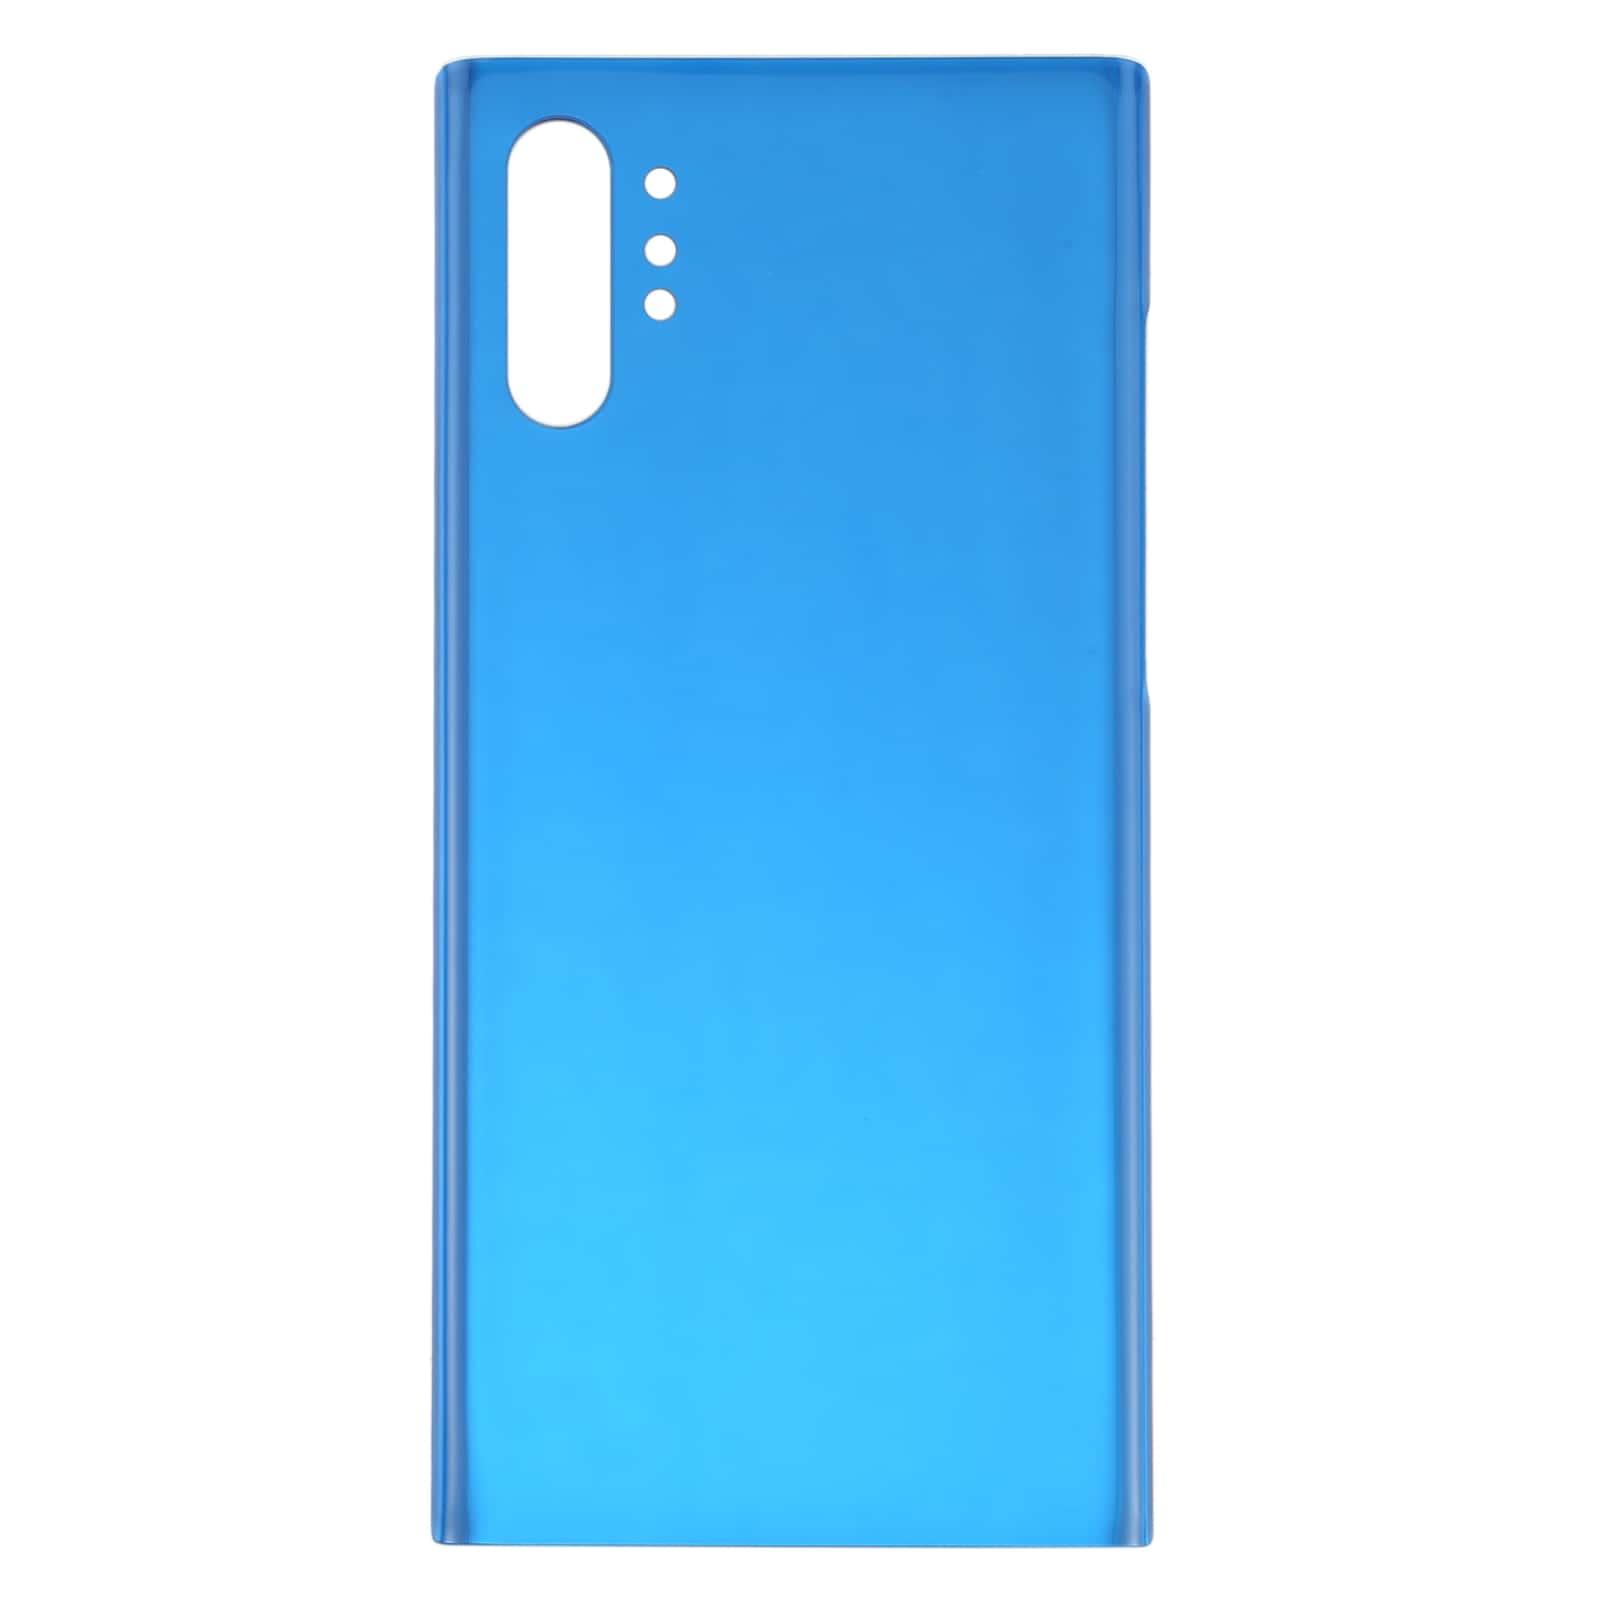 Back Glass Panel for  Samsung Galaxy Note10 Blue